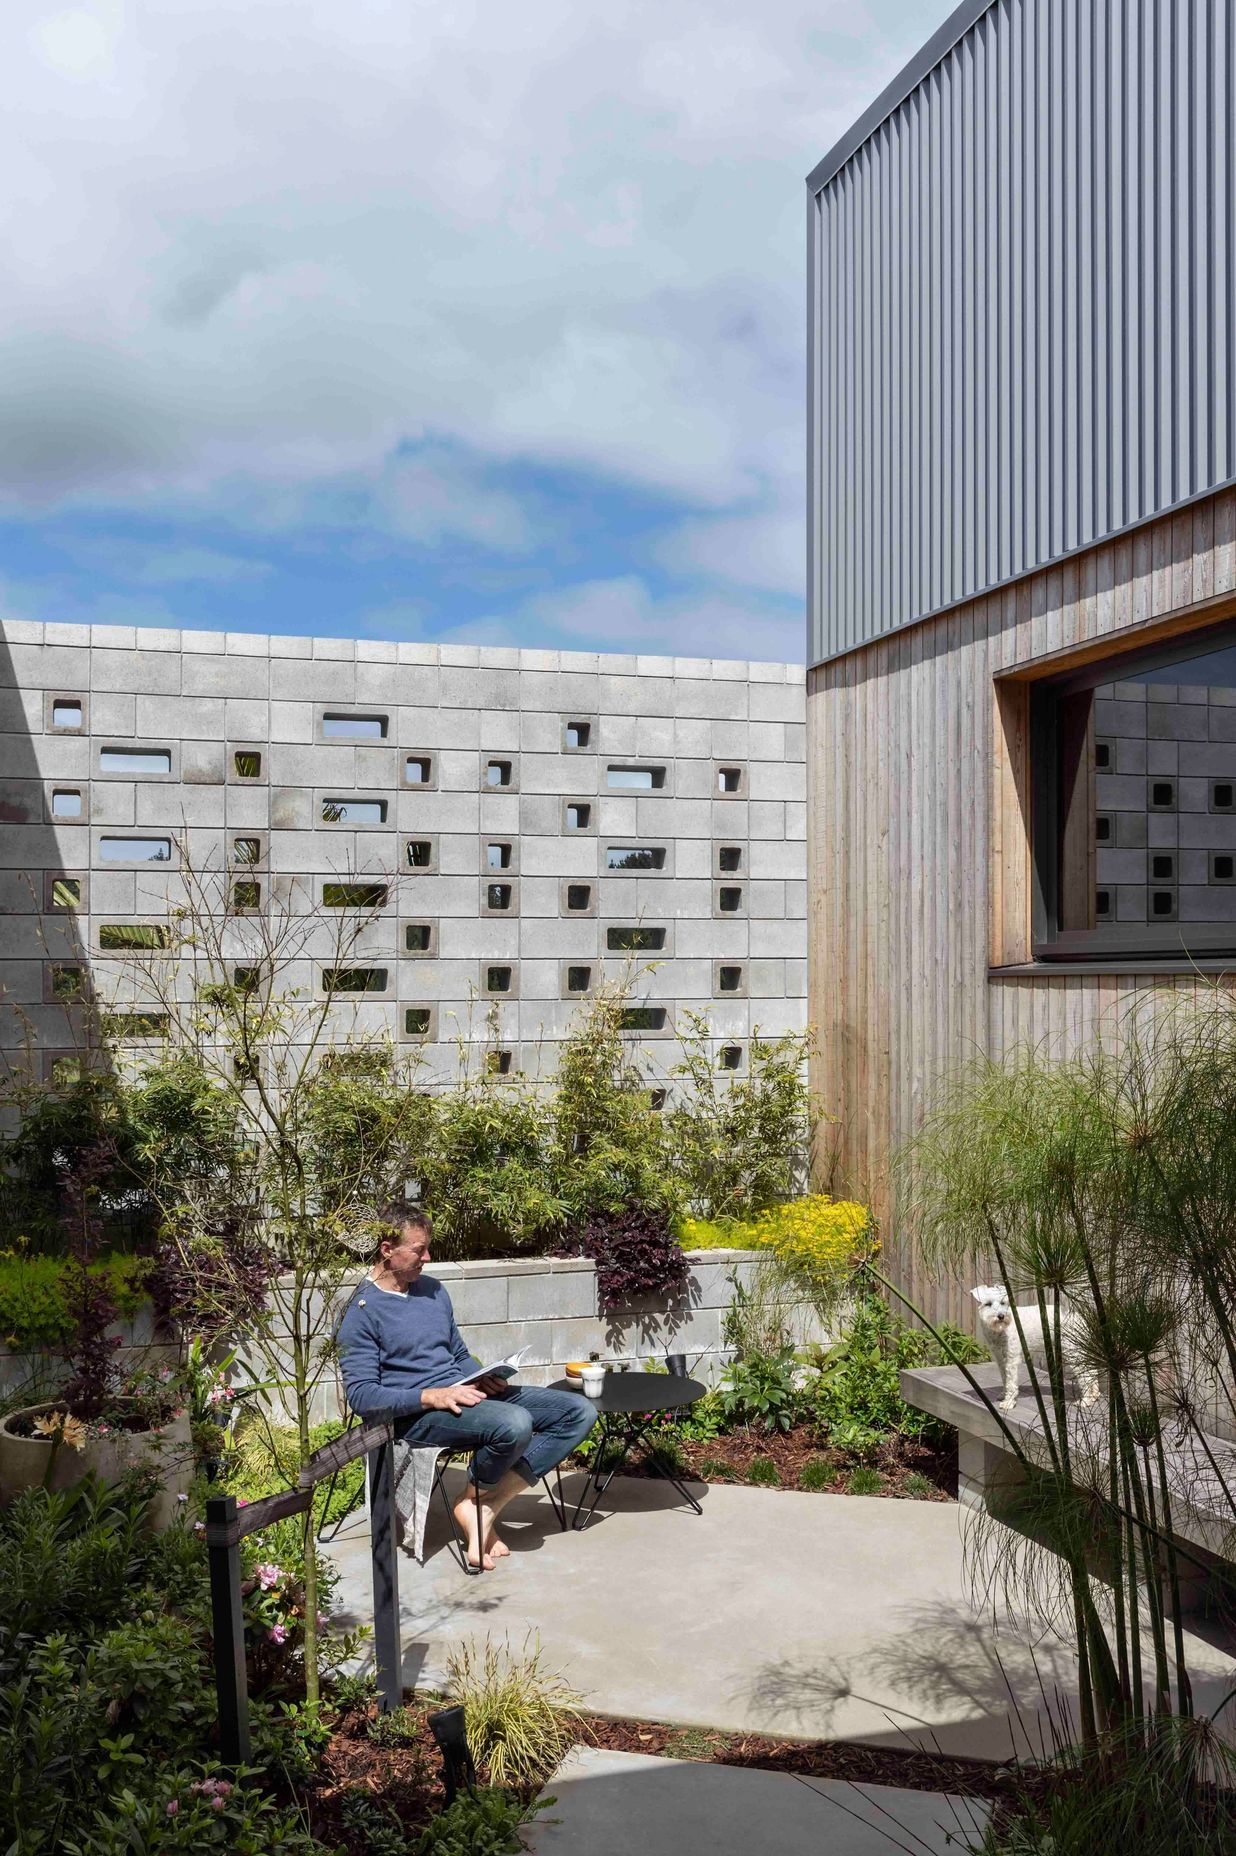 The external courtyard is stepped into the slope and protected by the perforated block wall.